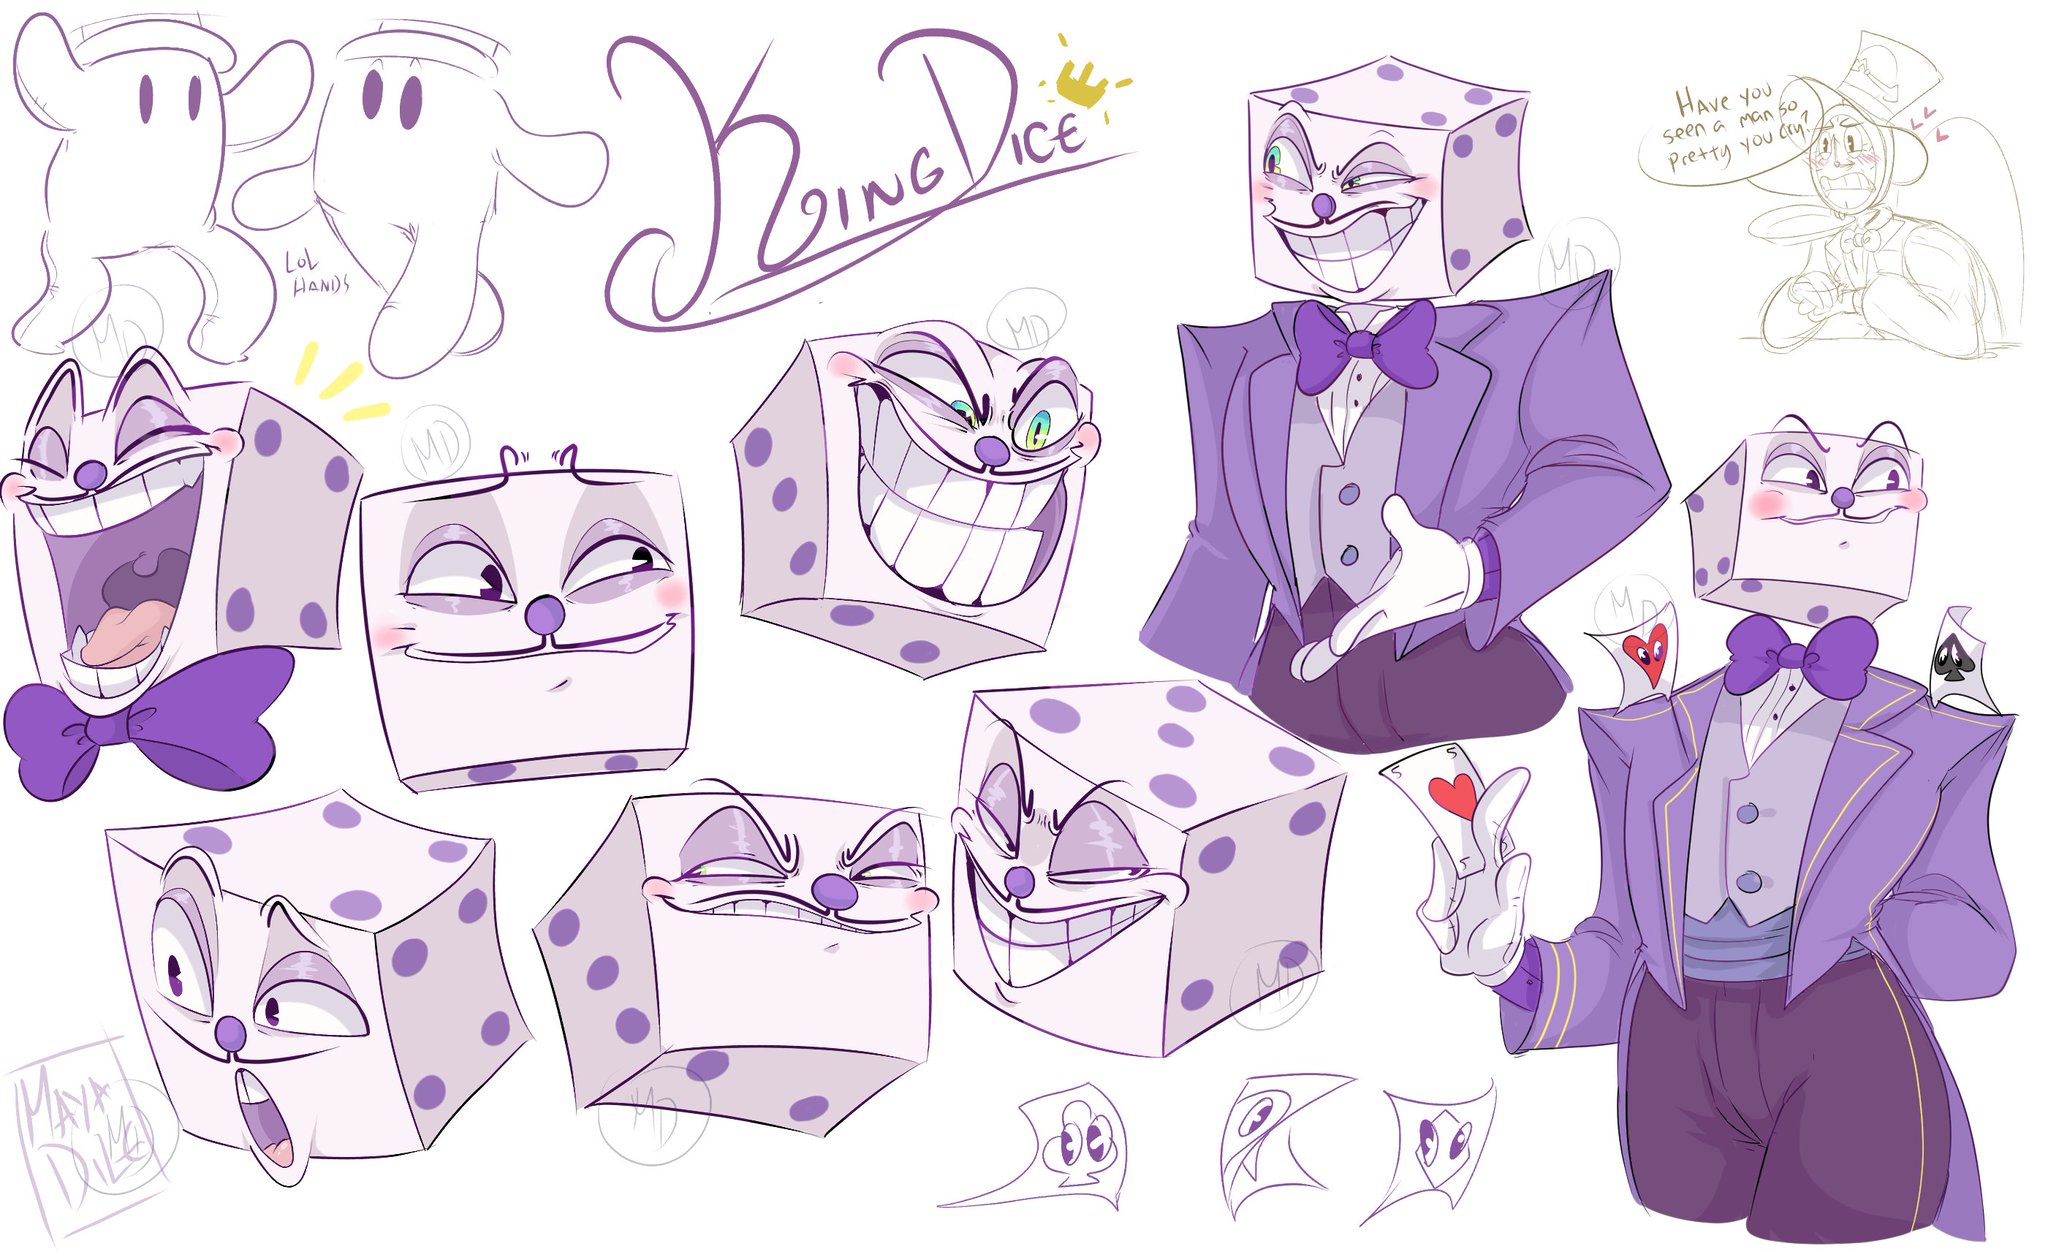 “Oh hey I finished those King Dice pictures 💜💜💜💜🎲💜💜💜💜” .